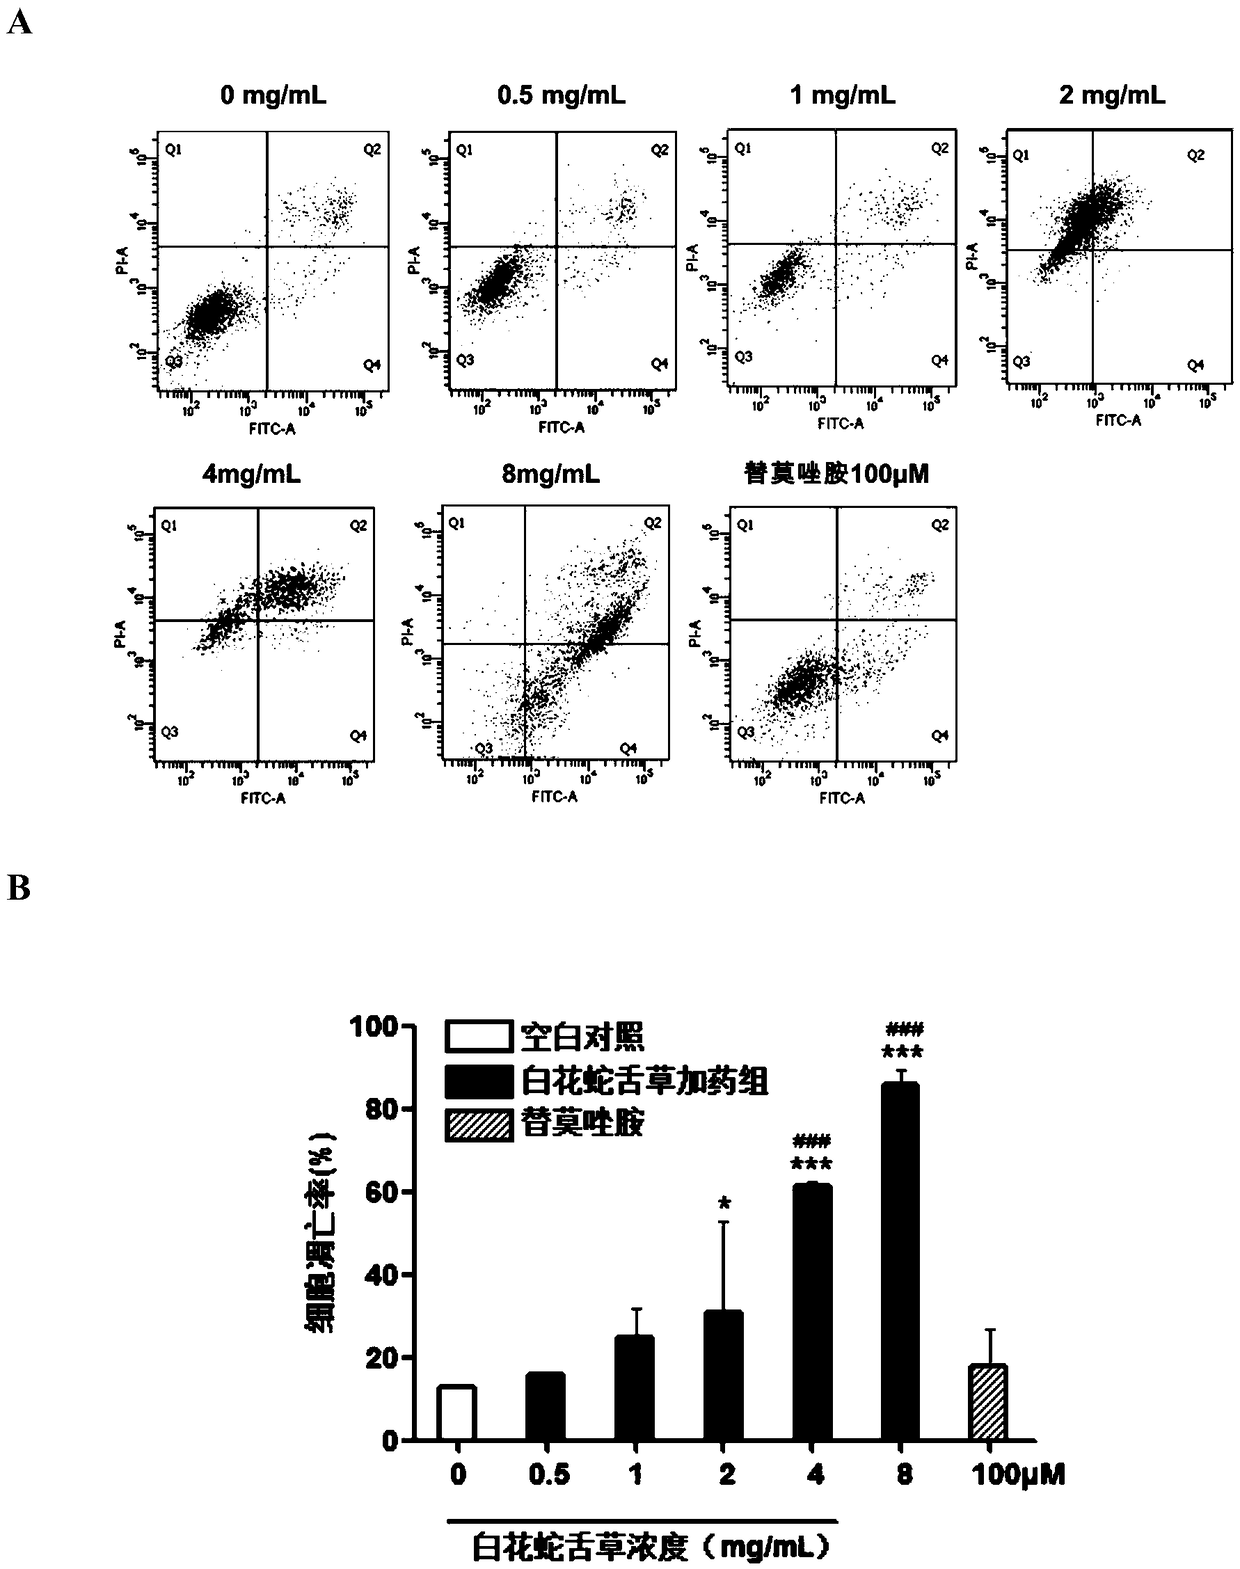 Application of oldenlandia diffusa in resisting against human brain glioma cell proliferation, promoting apoptosis, resisting against metastasis and resisting against invasion